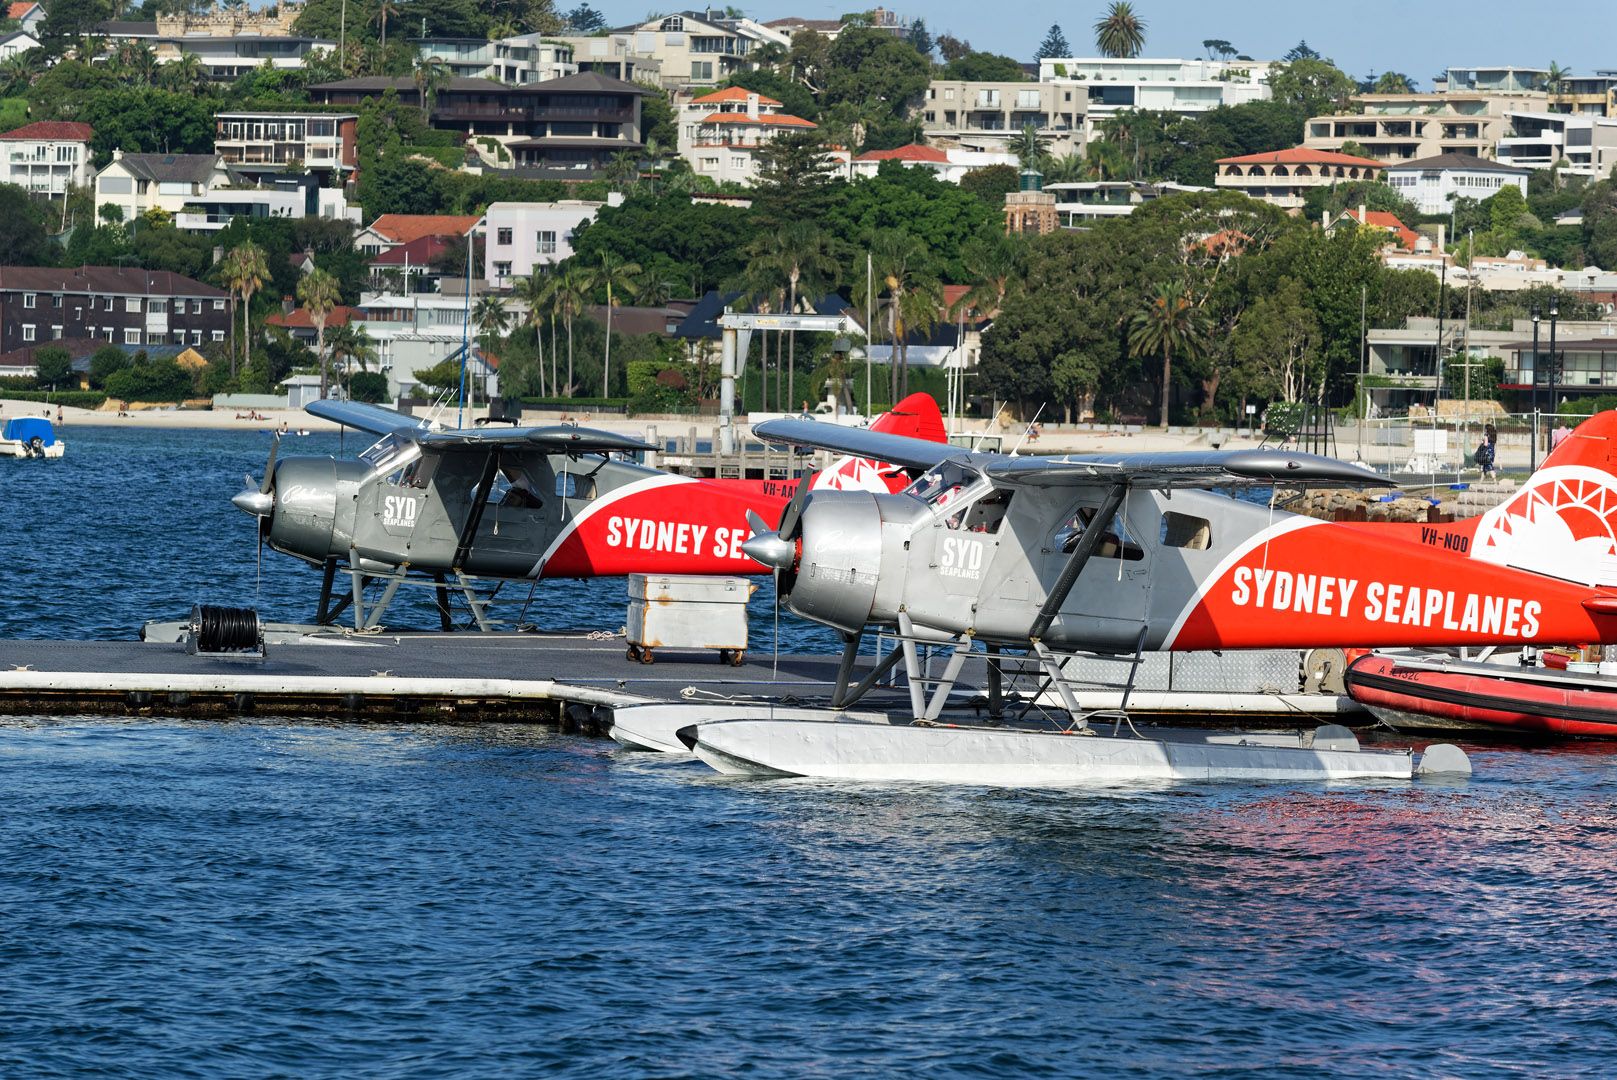 Photo of multiple Sydney Seaplanes parked at a dock.